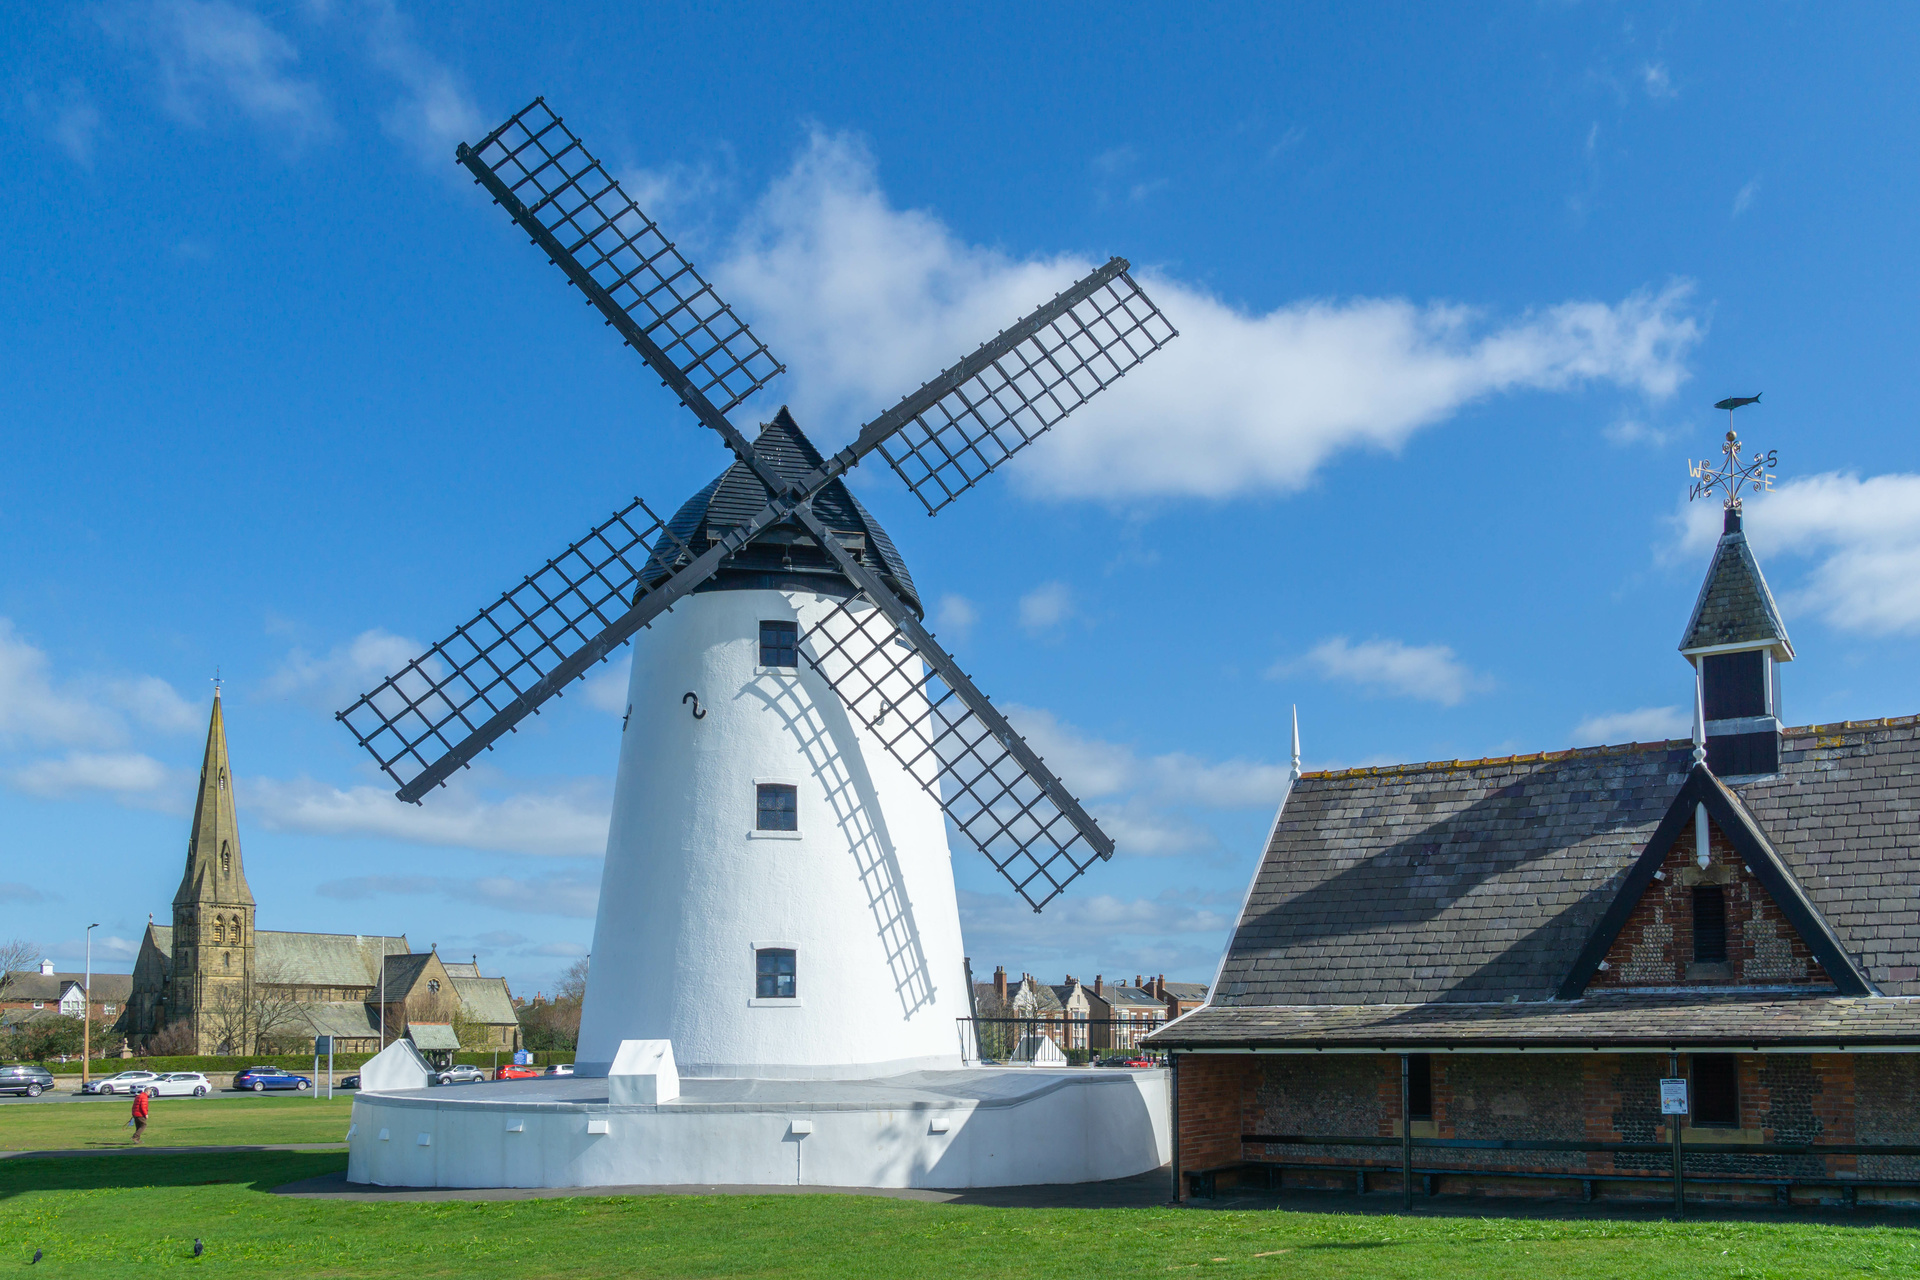 Lytham Windmill, near to our Conveyancing Solicitors in Lytham's office